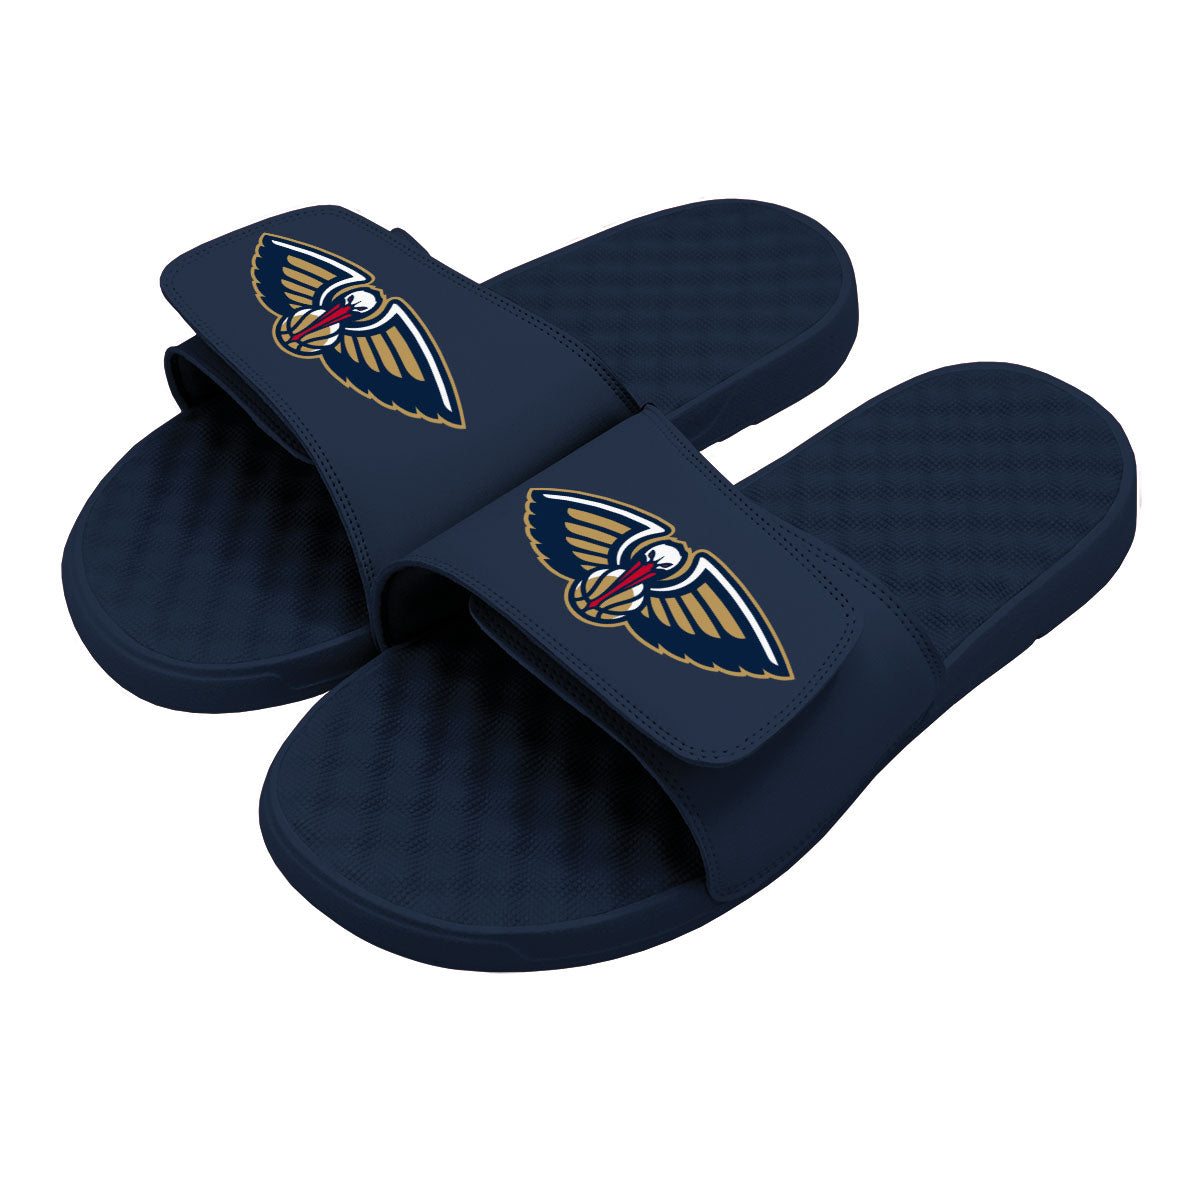 New Orleans Pelicans Primary Slides